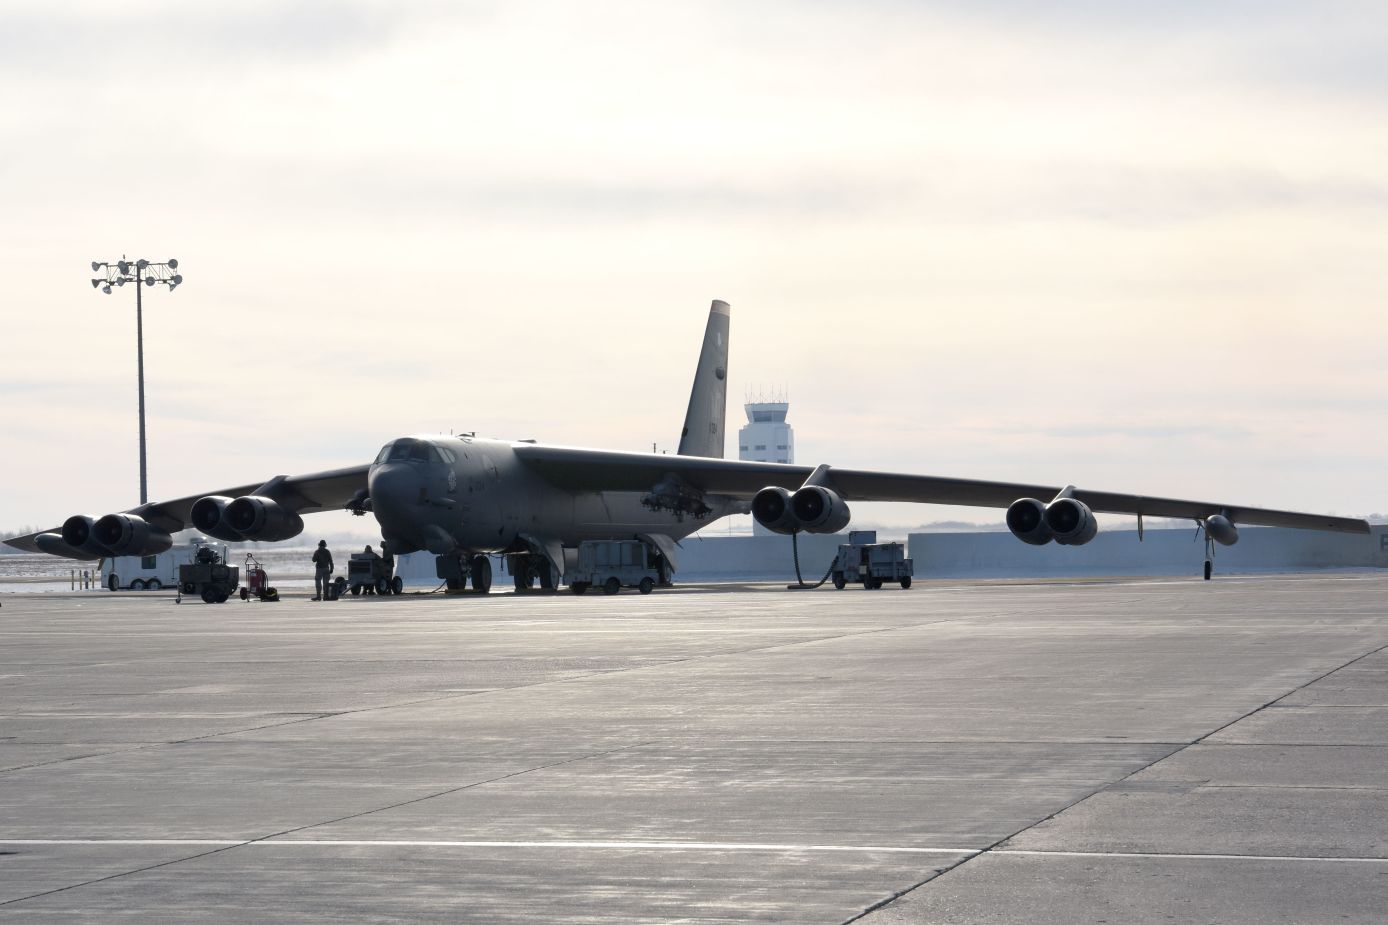 A B-52H Stratofortress sits on the flight line at Minot Air Force Base in North Dakota on 10 Jan 2019. Boeing, lead integrator for the B-52H re-engining effort, will not inspect the pylons prior to installing new engines as the company is replacing the pylon and nacelle. (US Air Force)